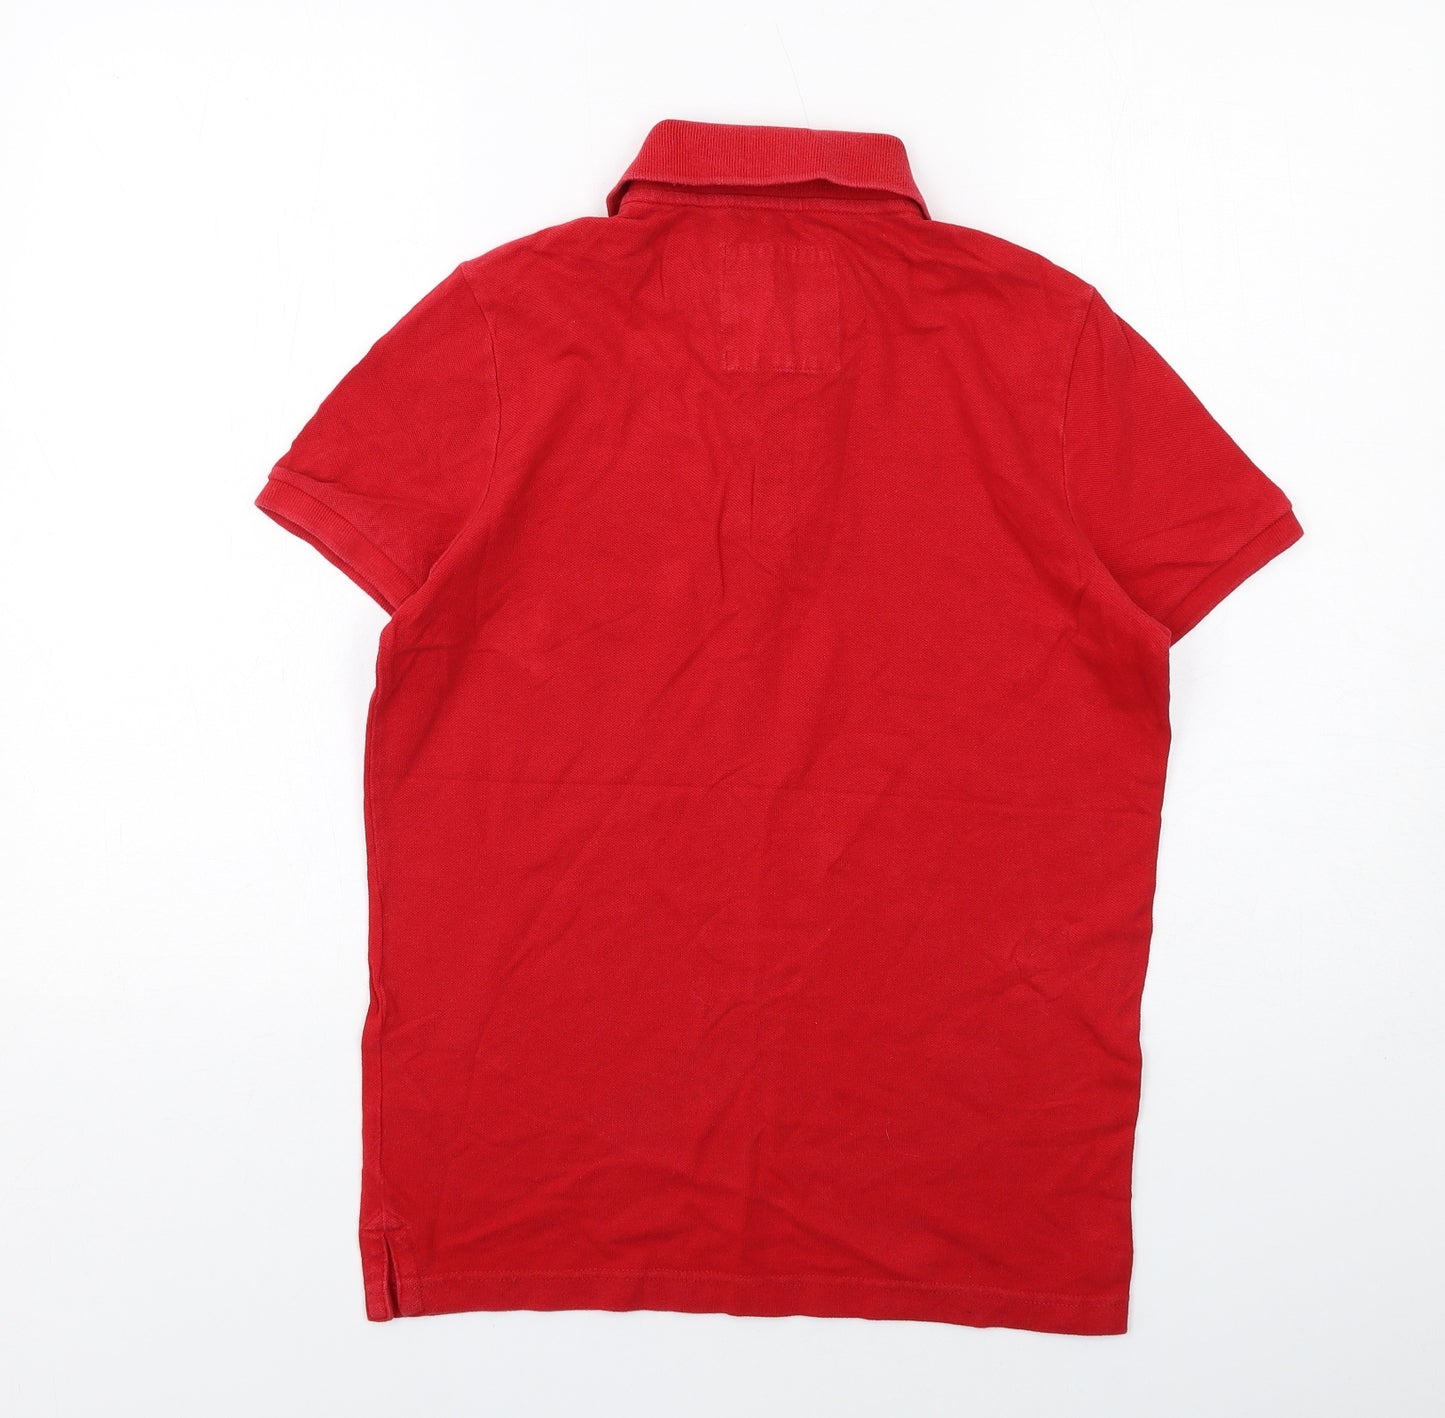 Hollister Mens Red Cotton Polo Size S Collared Button